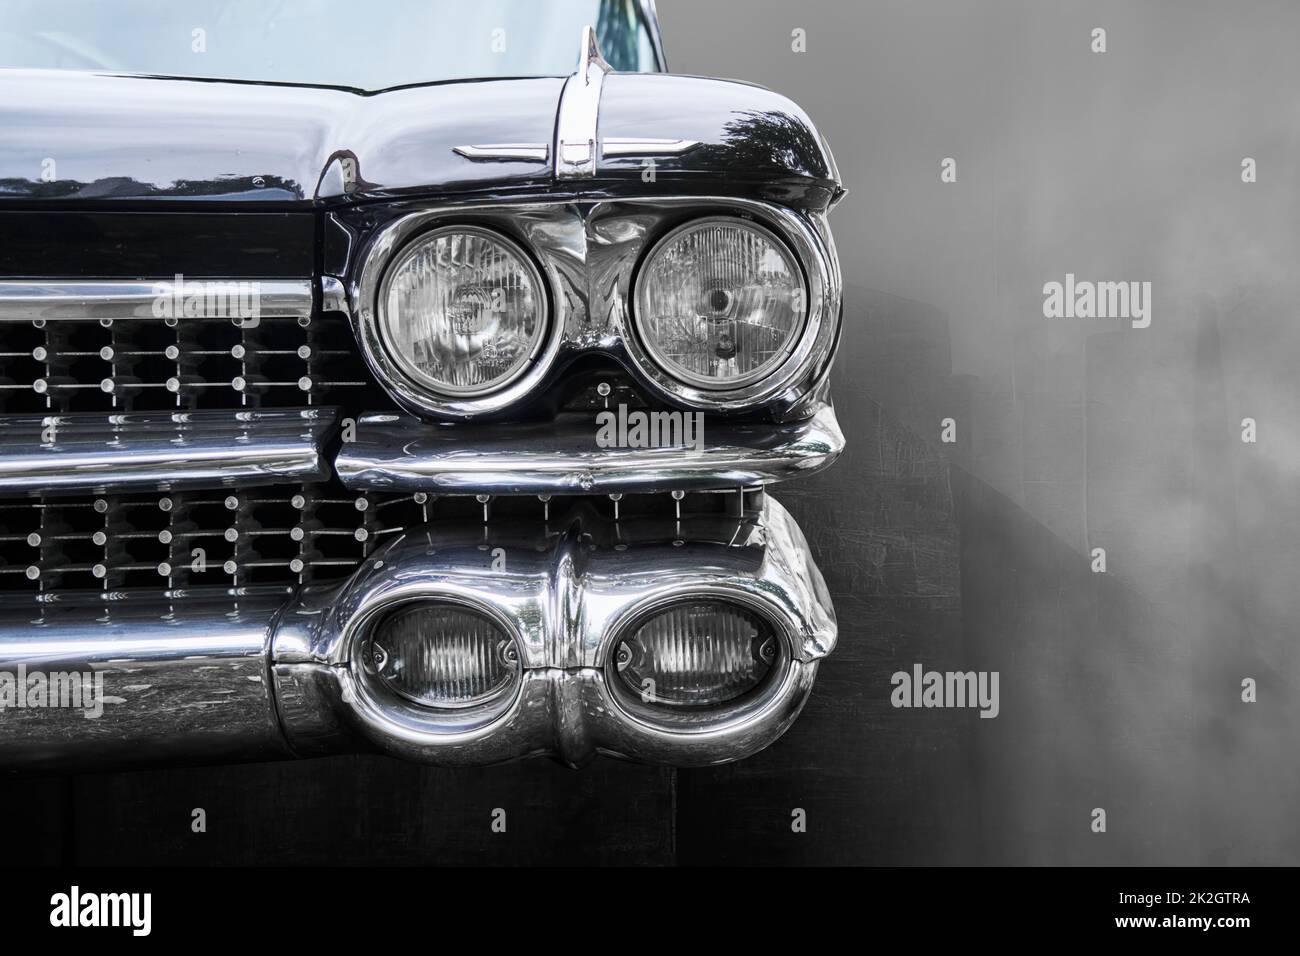 Front headlights of antique American road cruiser against blurred background, monochrome image Stock Photo